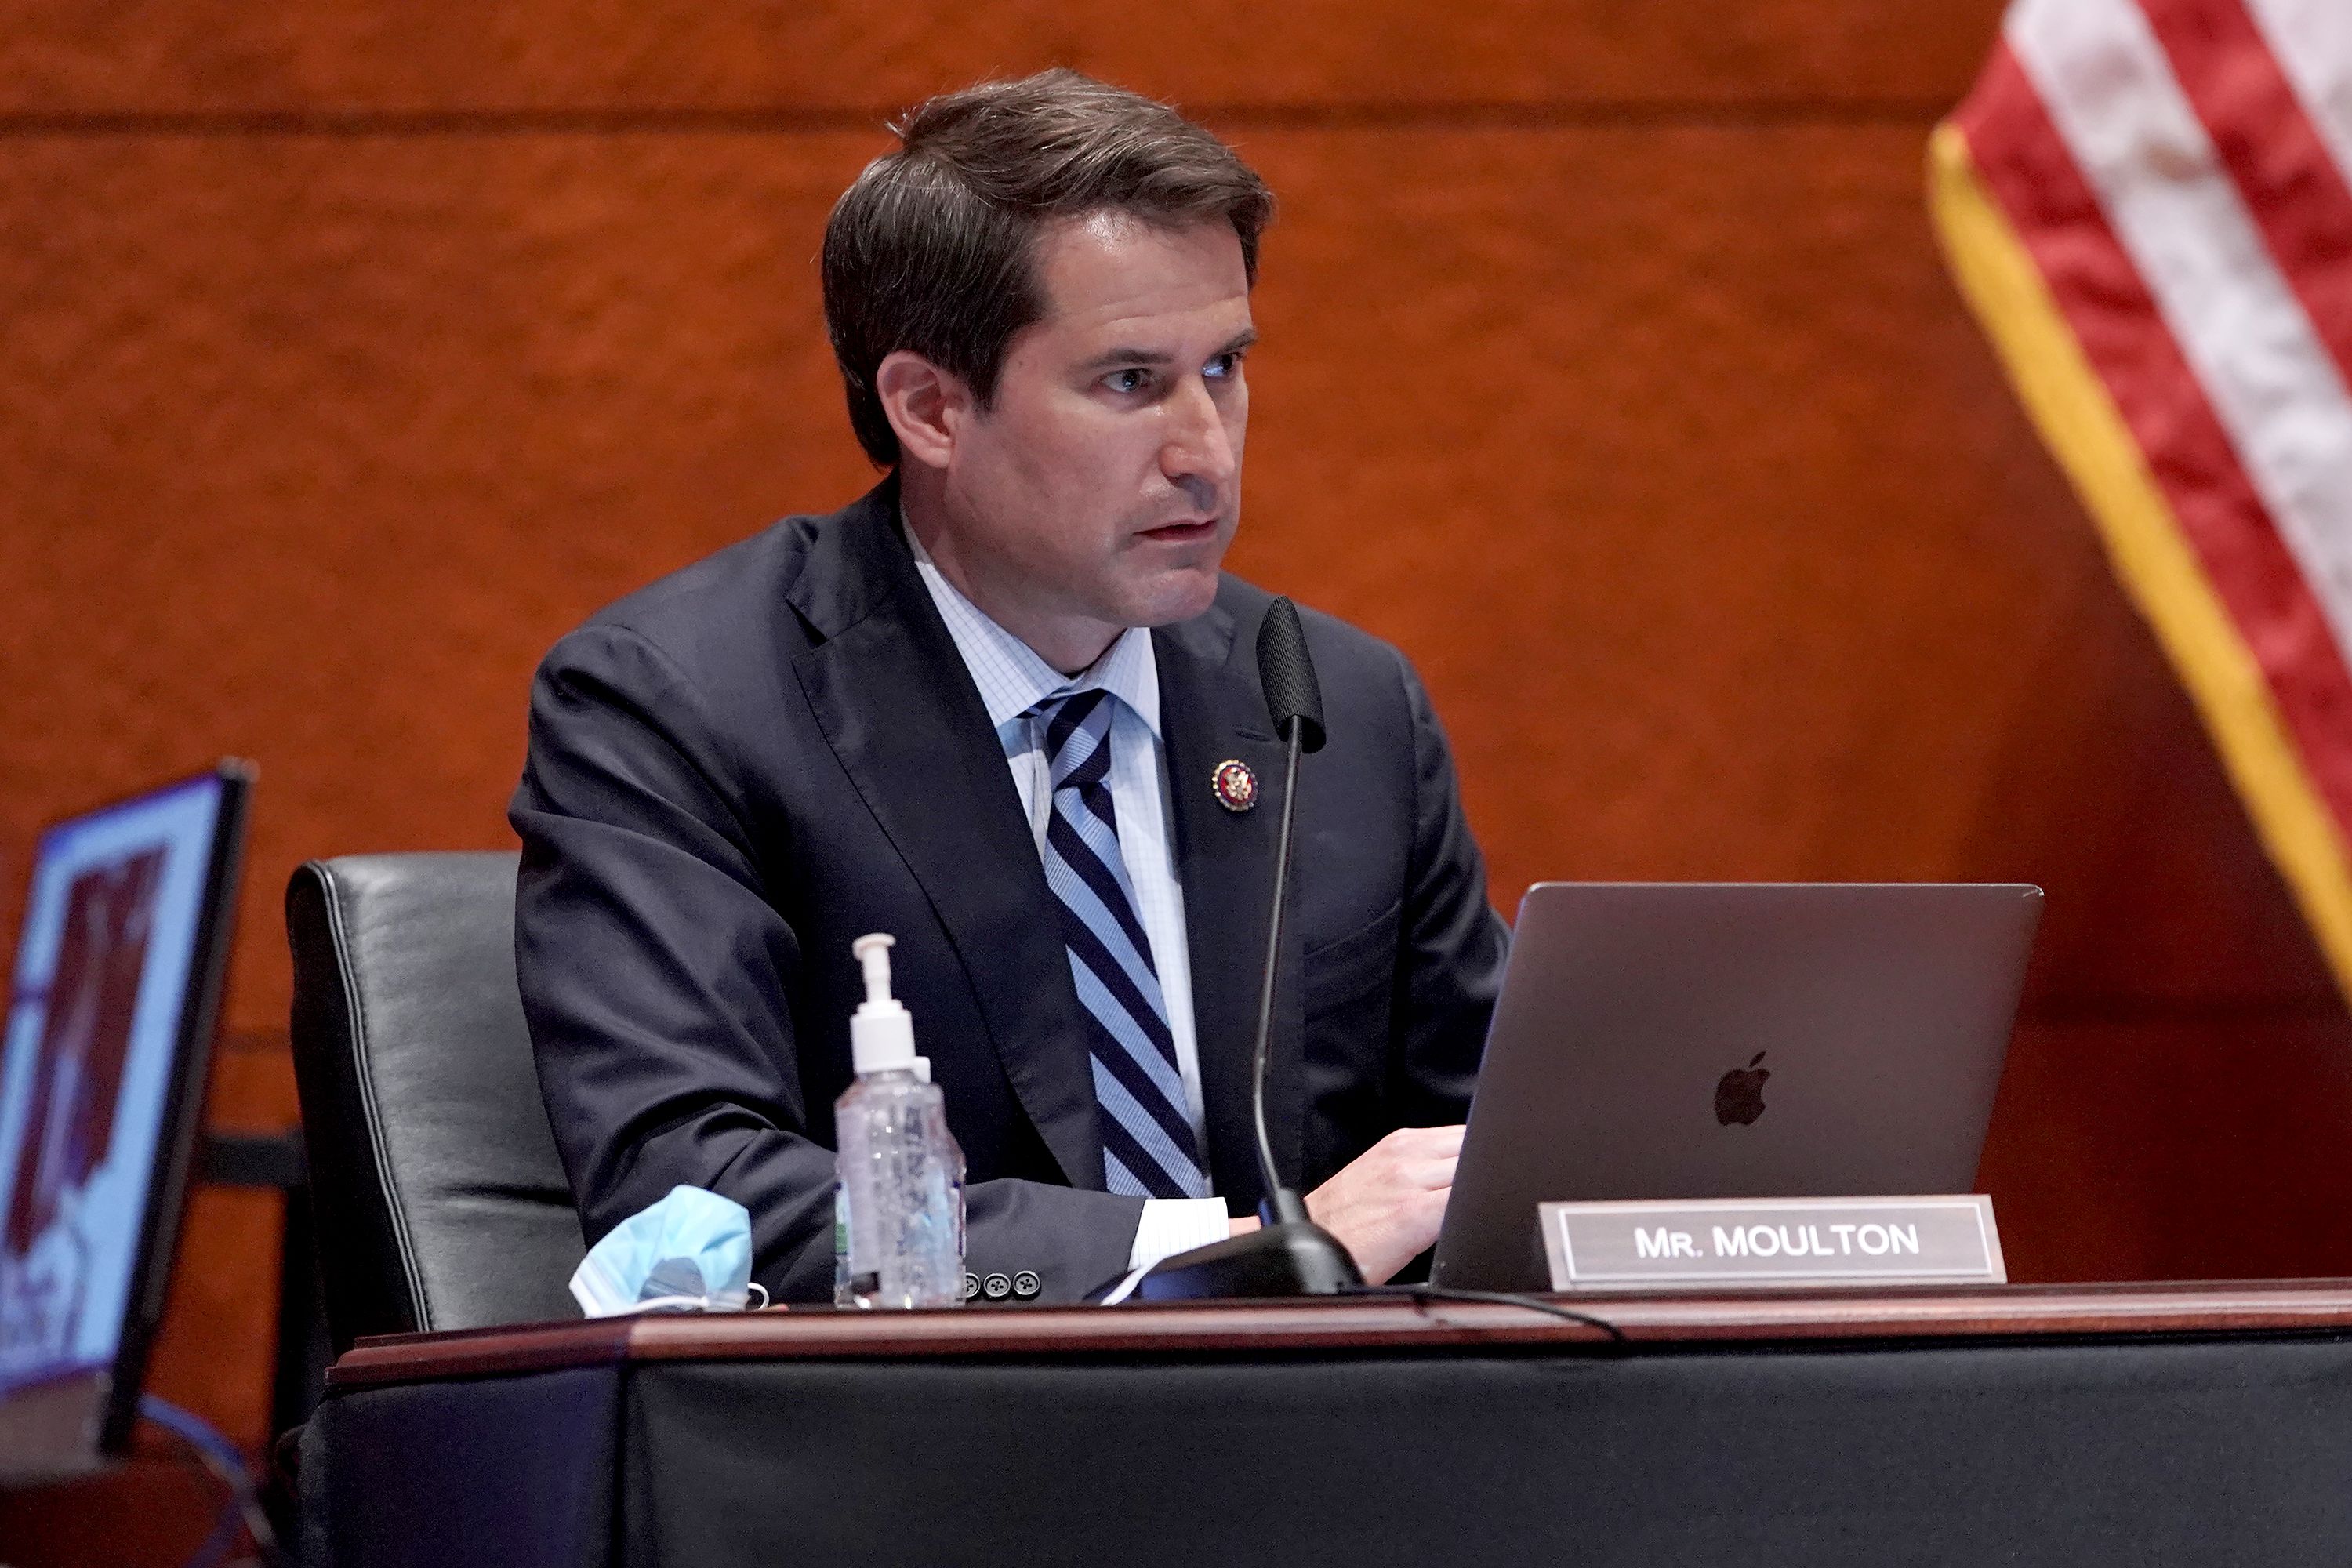 Tucker Carlson’s views on women in the army “Extreme for the 1950s”, says deputy Seth Moulton